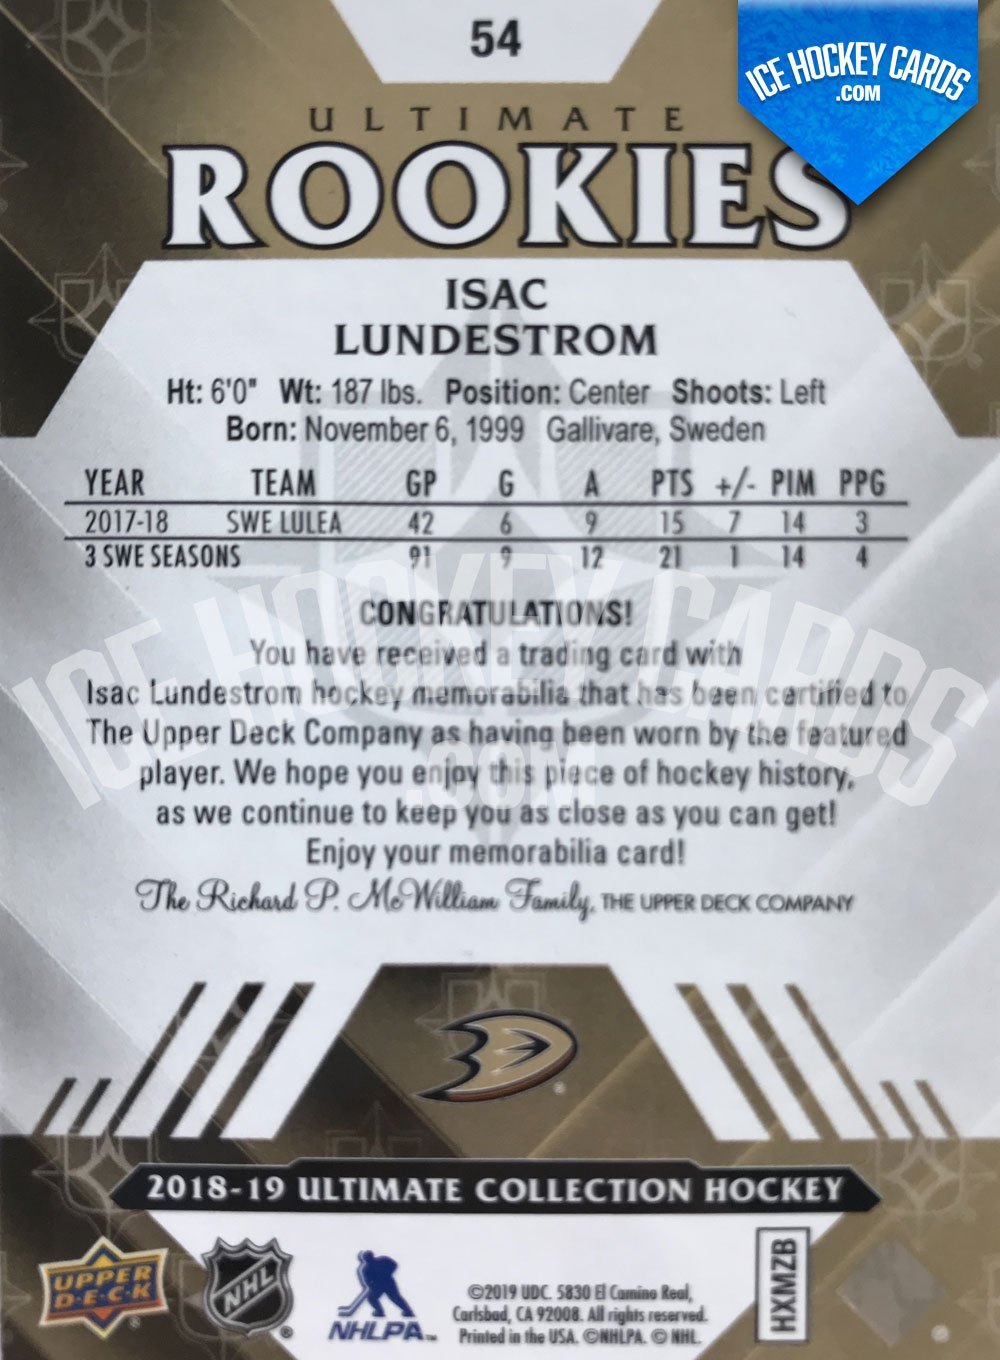 Upper Deck - Ultimate Collection 18-19 - Isac Lundestrom Ultimate Rookies Patch Card back